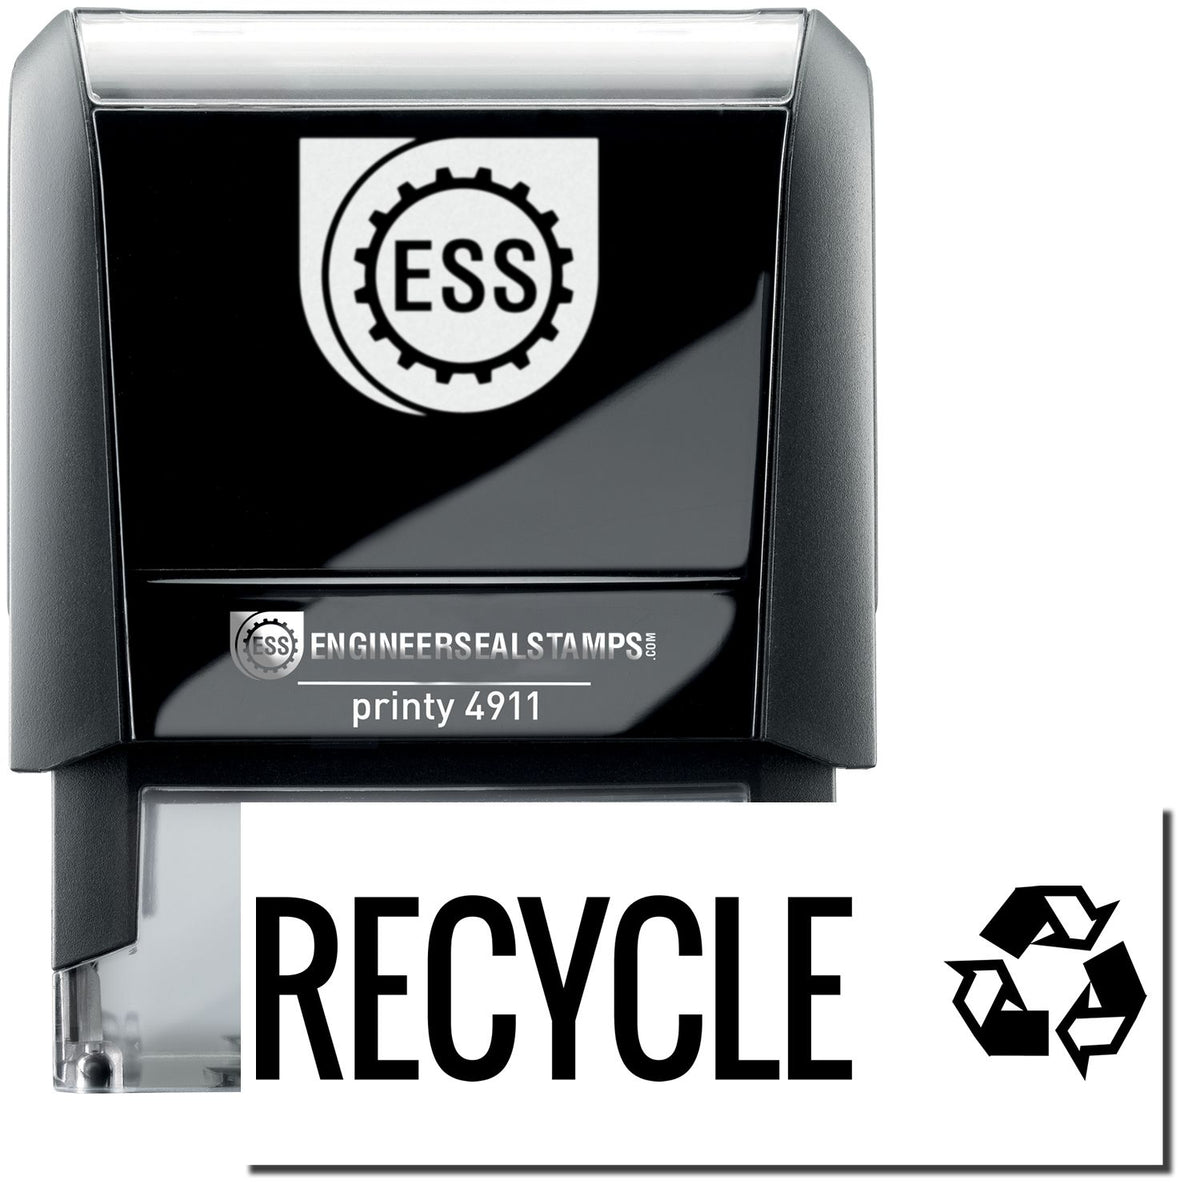 A self-inking stamp with a stamped image showing how the text &quot;RECYCLE&quot; with the recycling icon on the right side is displayed after stamping.